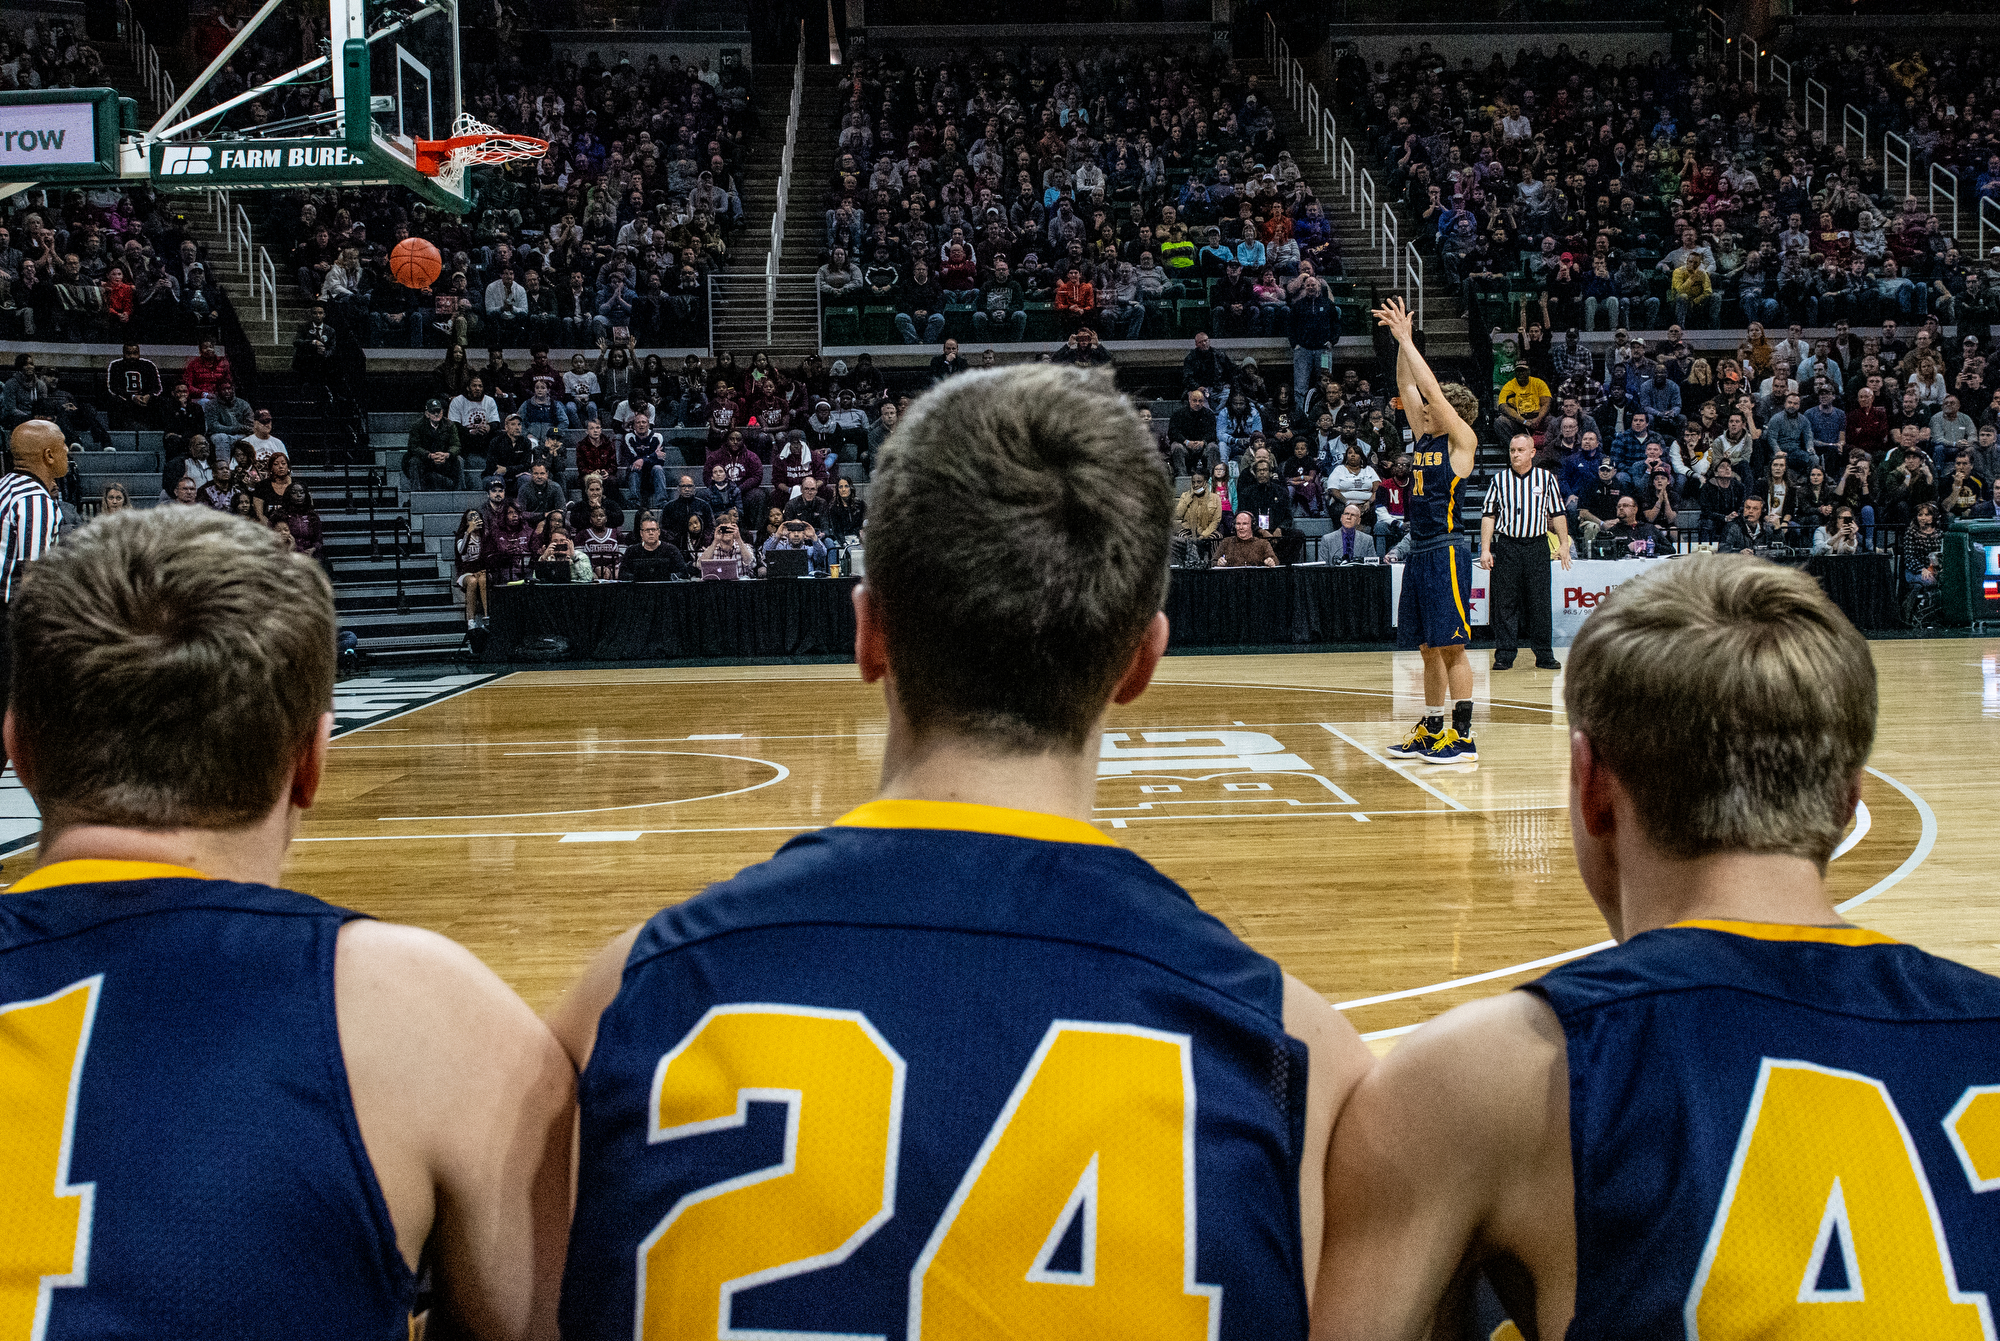  Pewamo-Westphalia's Collin Trierweiler (11) sinks the game-winning free throw, during the MHSAA Division 3 state final boys basketball game between Iron Mountain and Pewamo-Westphalia at Michigan State University's Breslin Center, Saturday, March 16